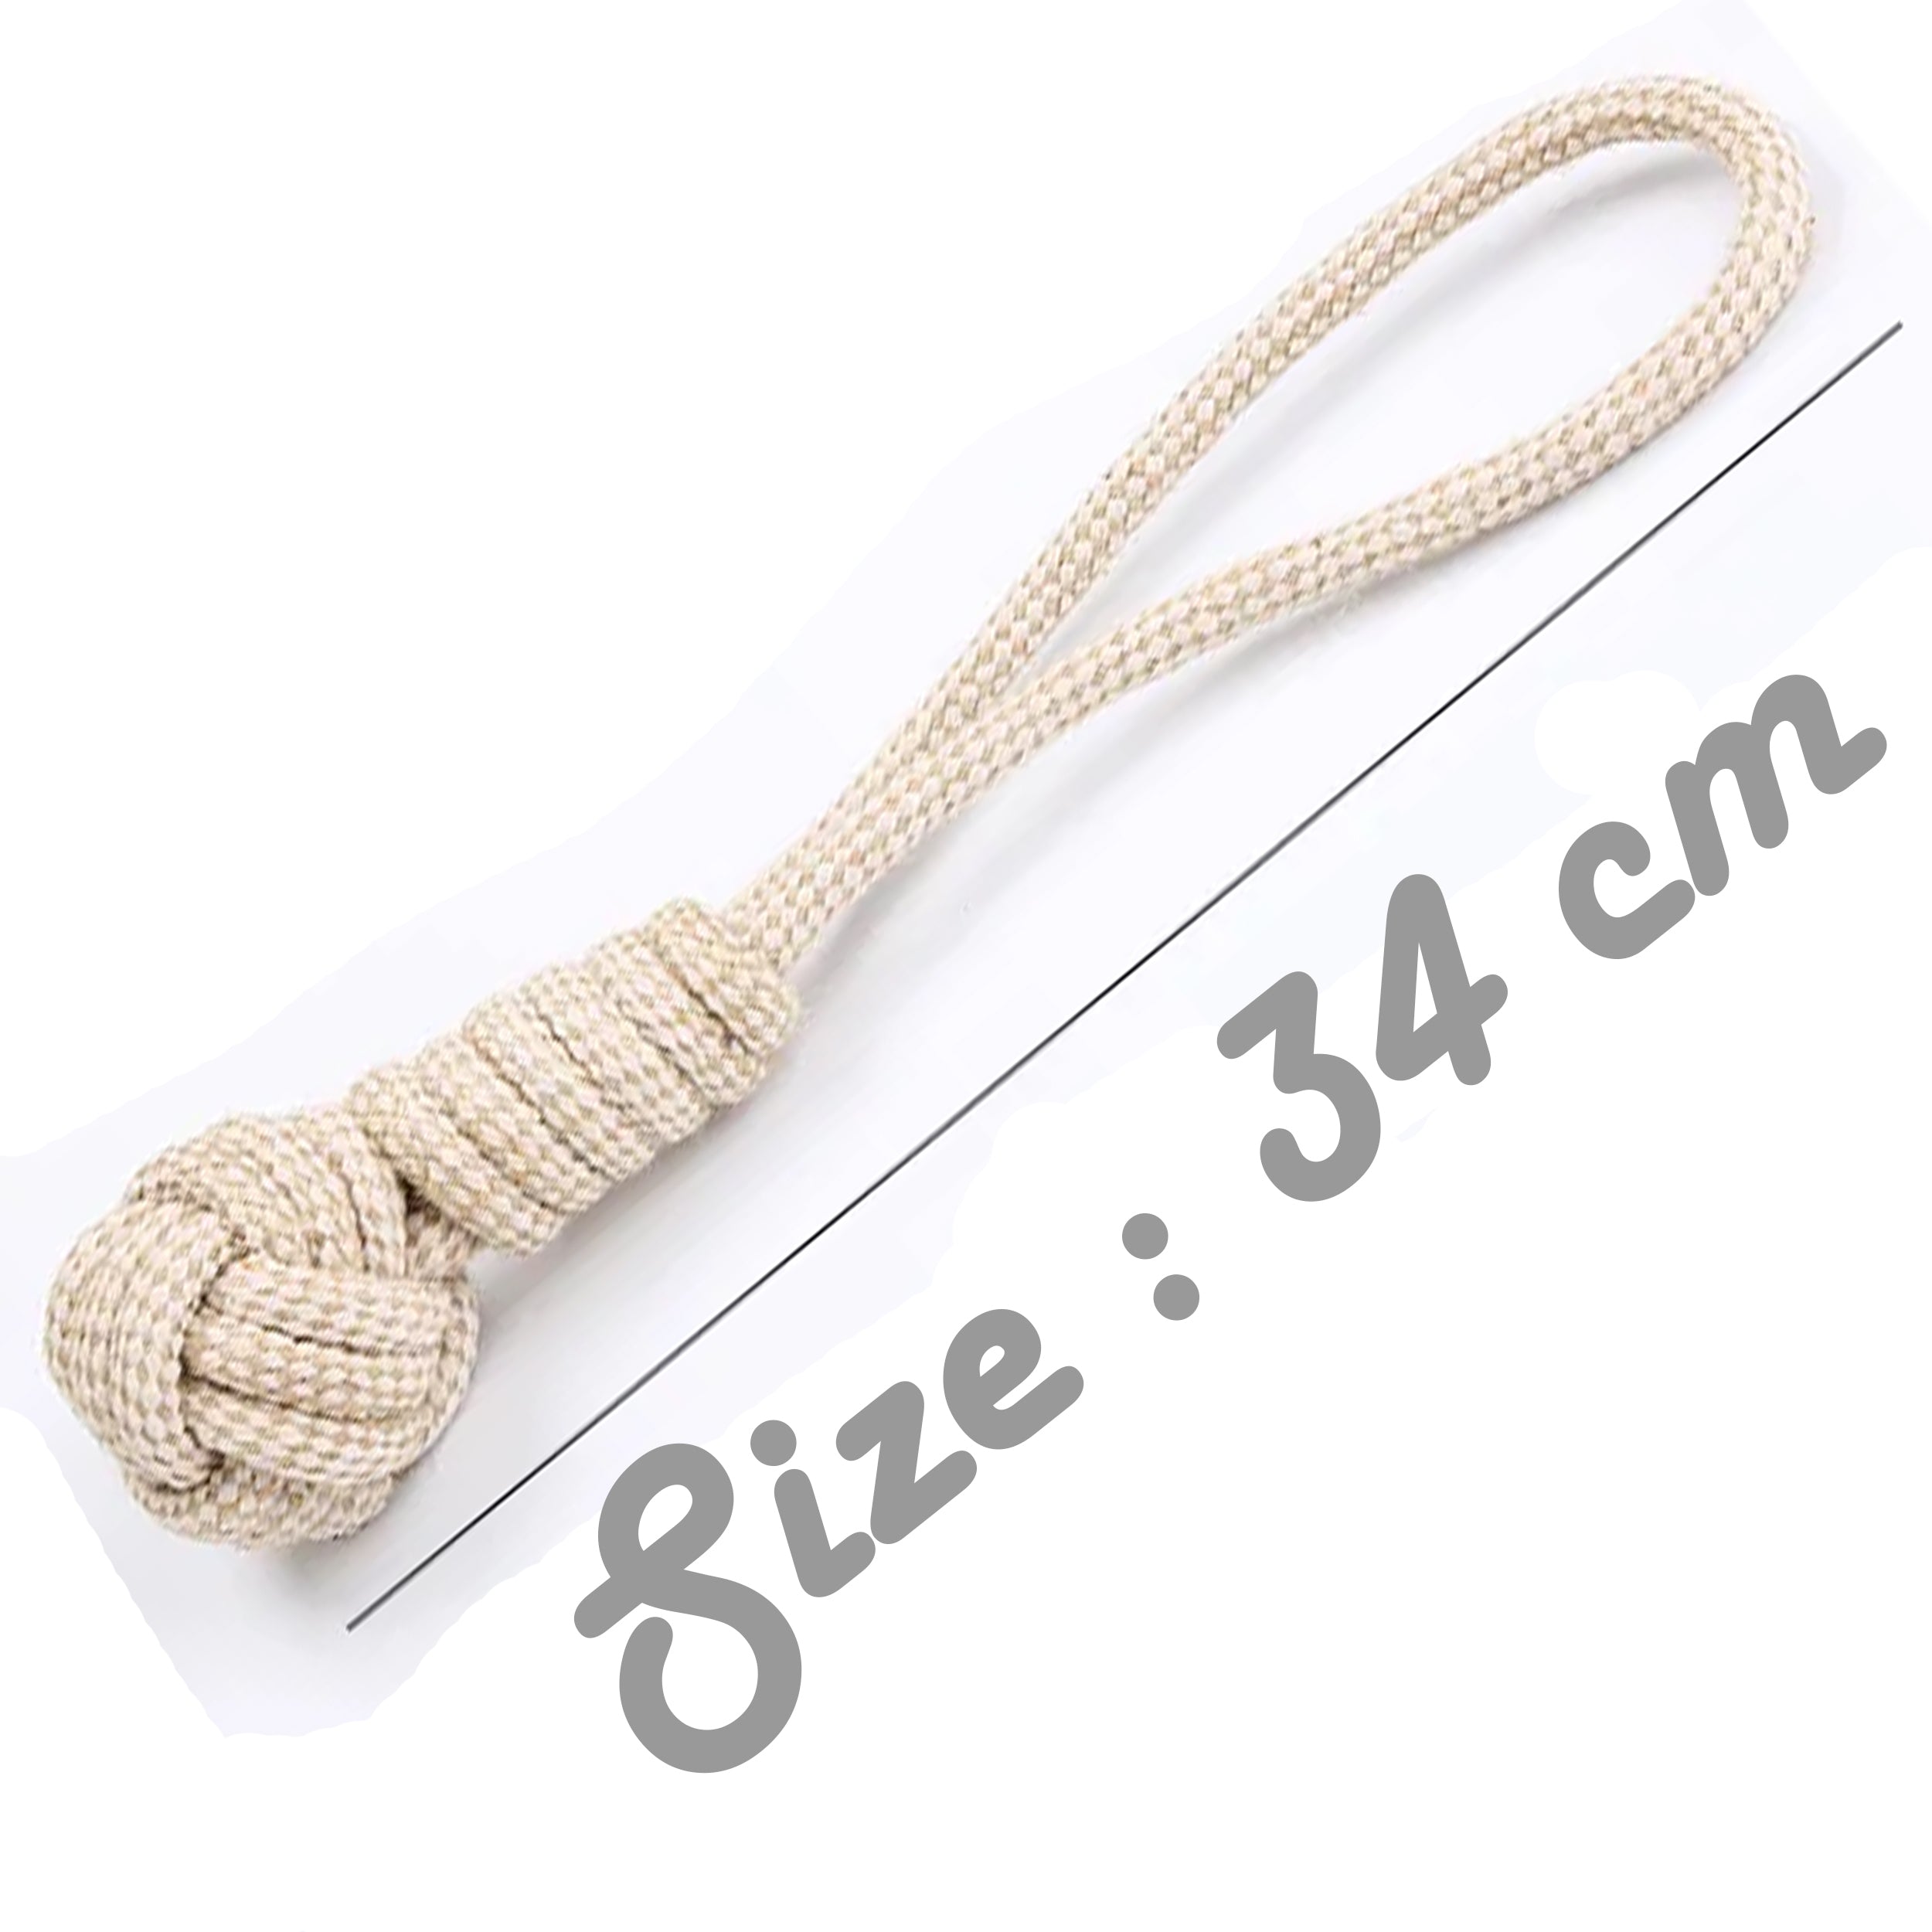 Keep Your Dog's Teeth Healthy and Strong with Our Durable Braided Sisal Cotton Rope Ball Dog Chew Toy